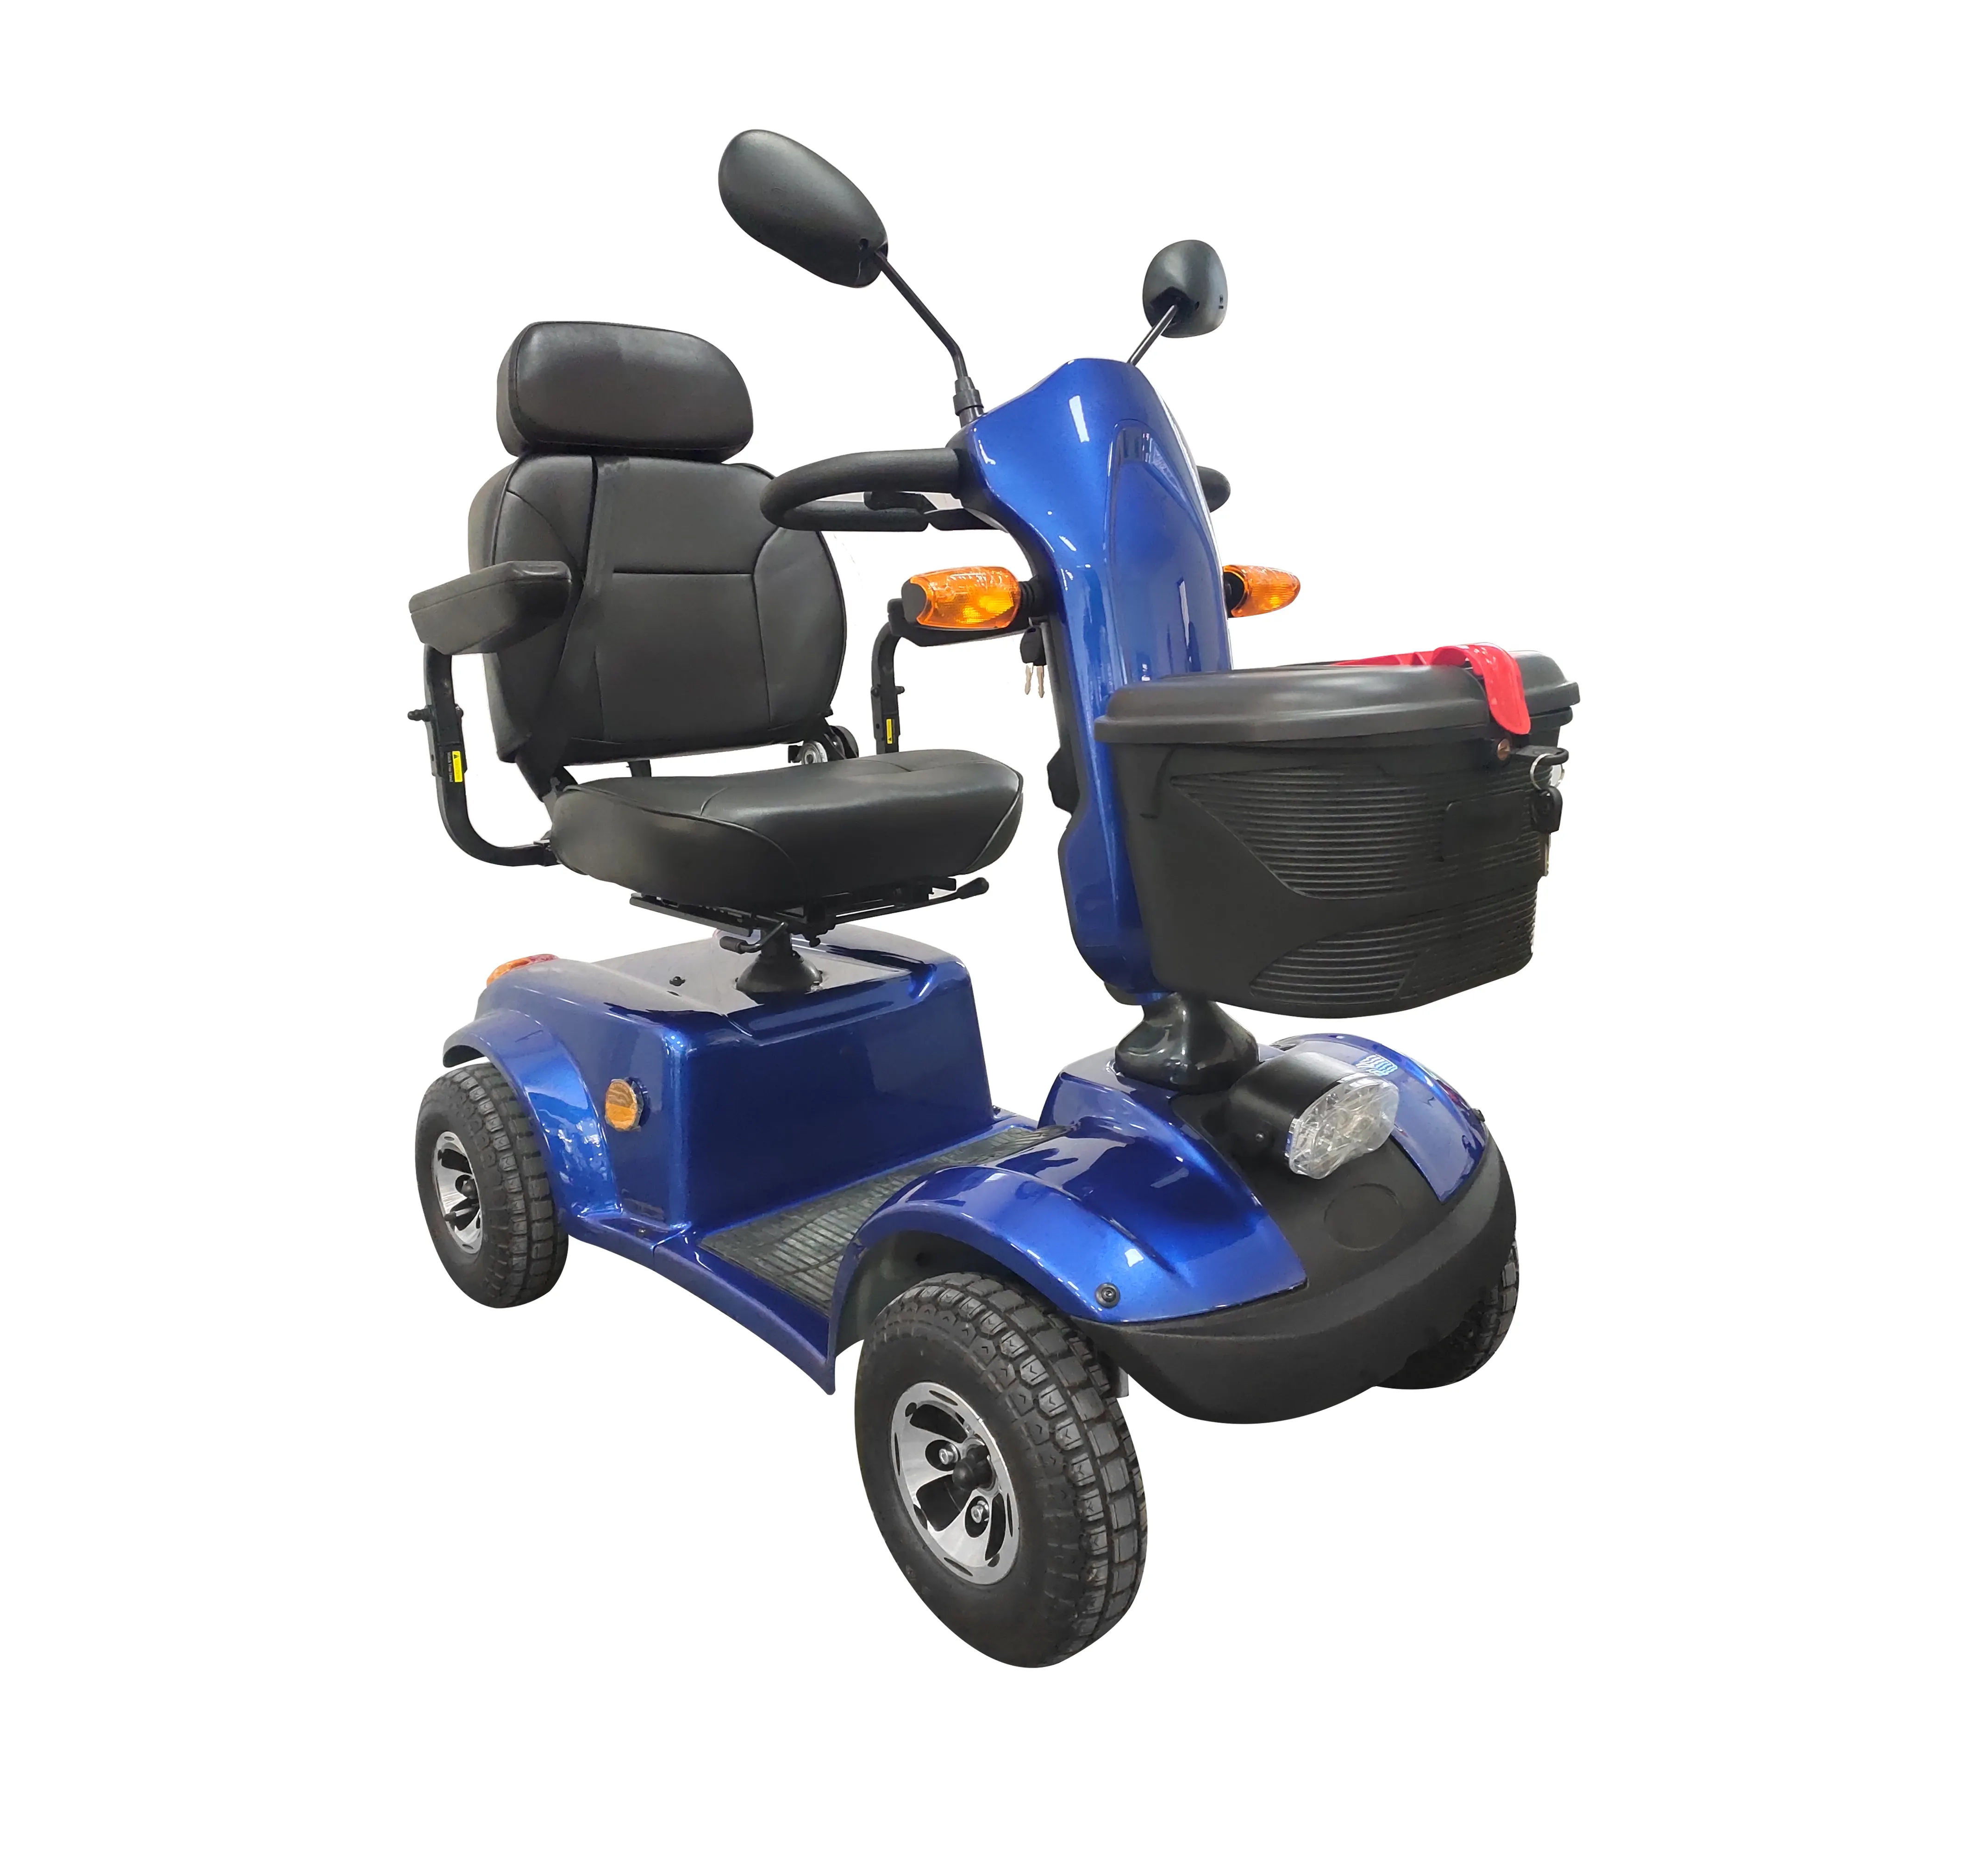 Adult City Electric With Fishnable Color Four Wheel Moped Bike Mobility Scooter 4 Wheel